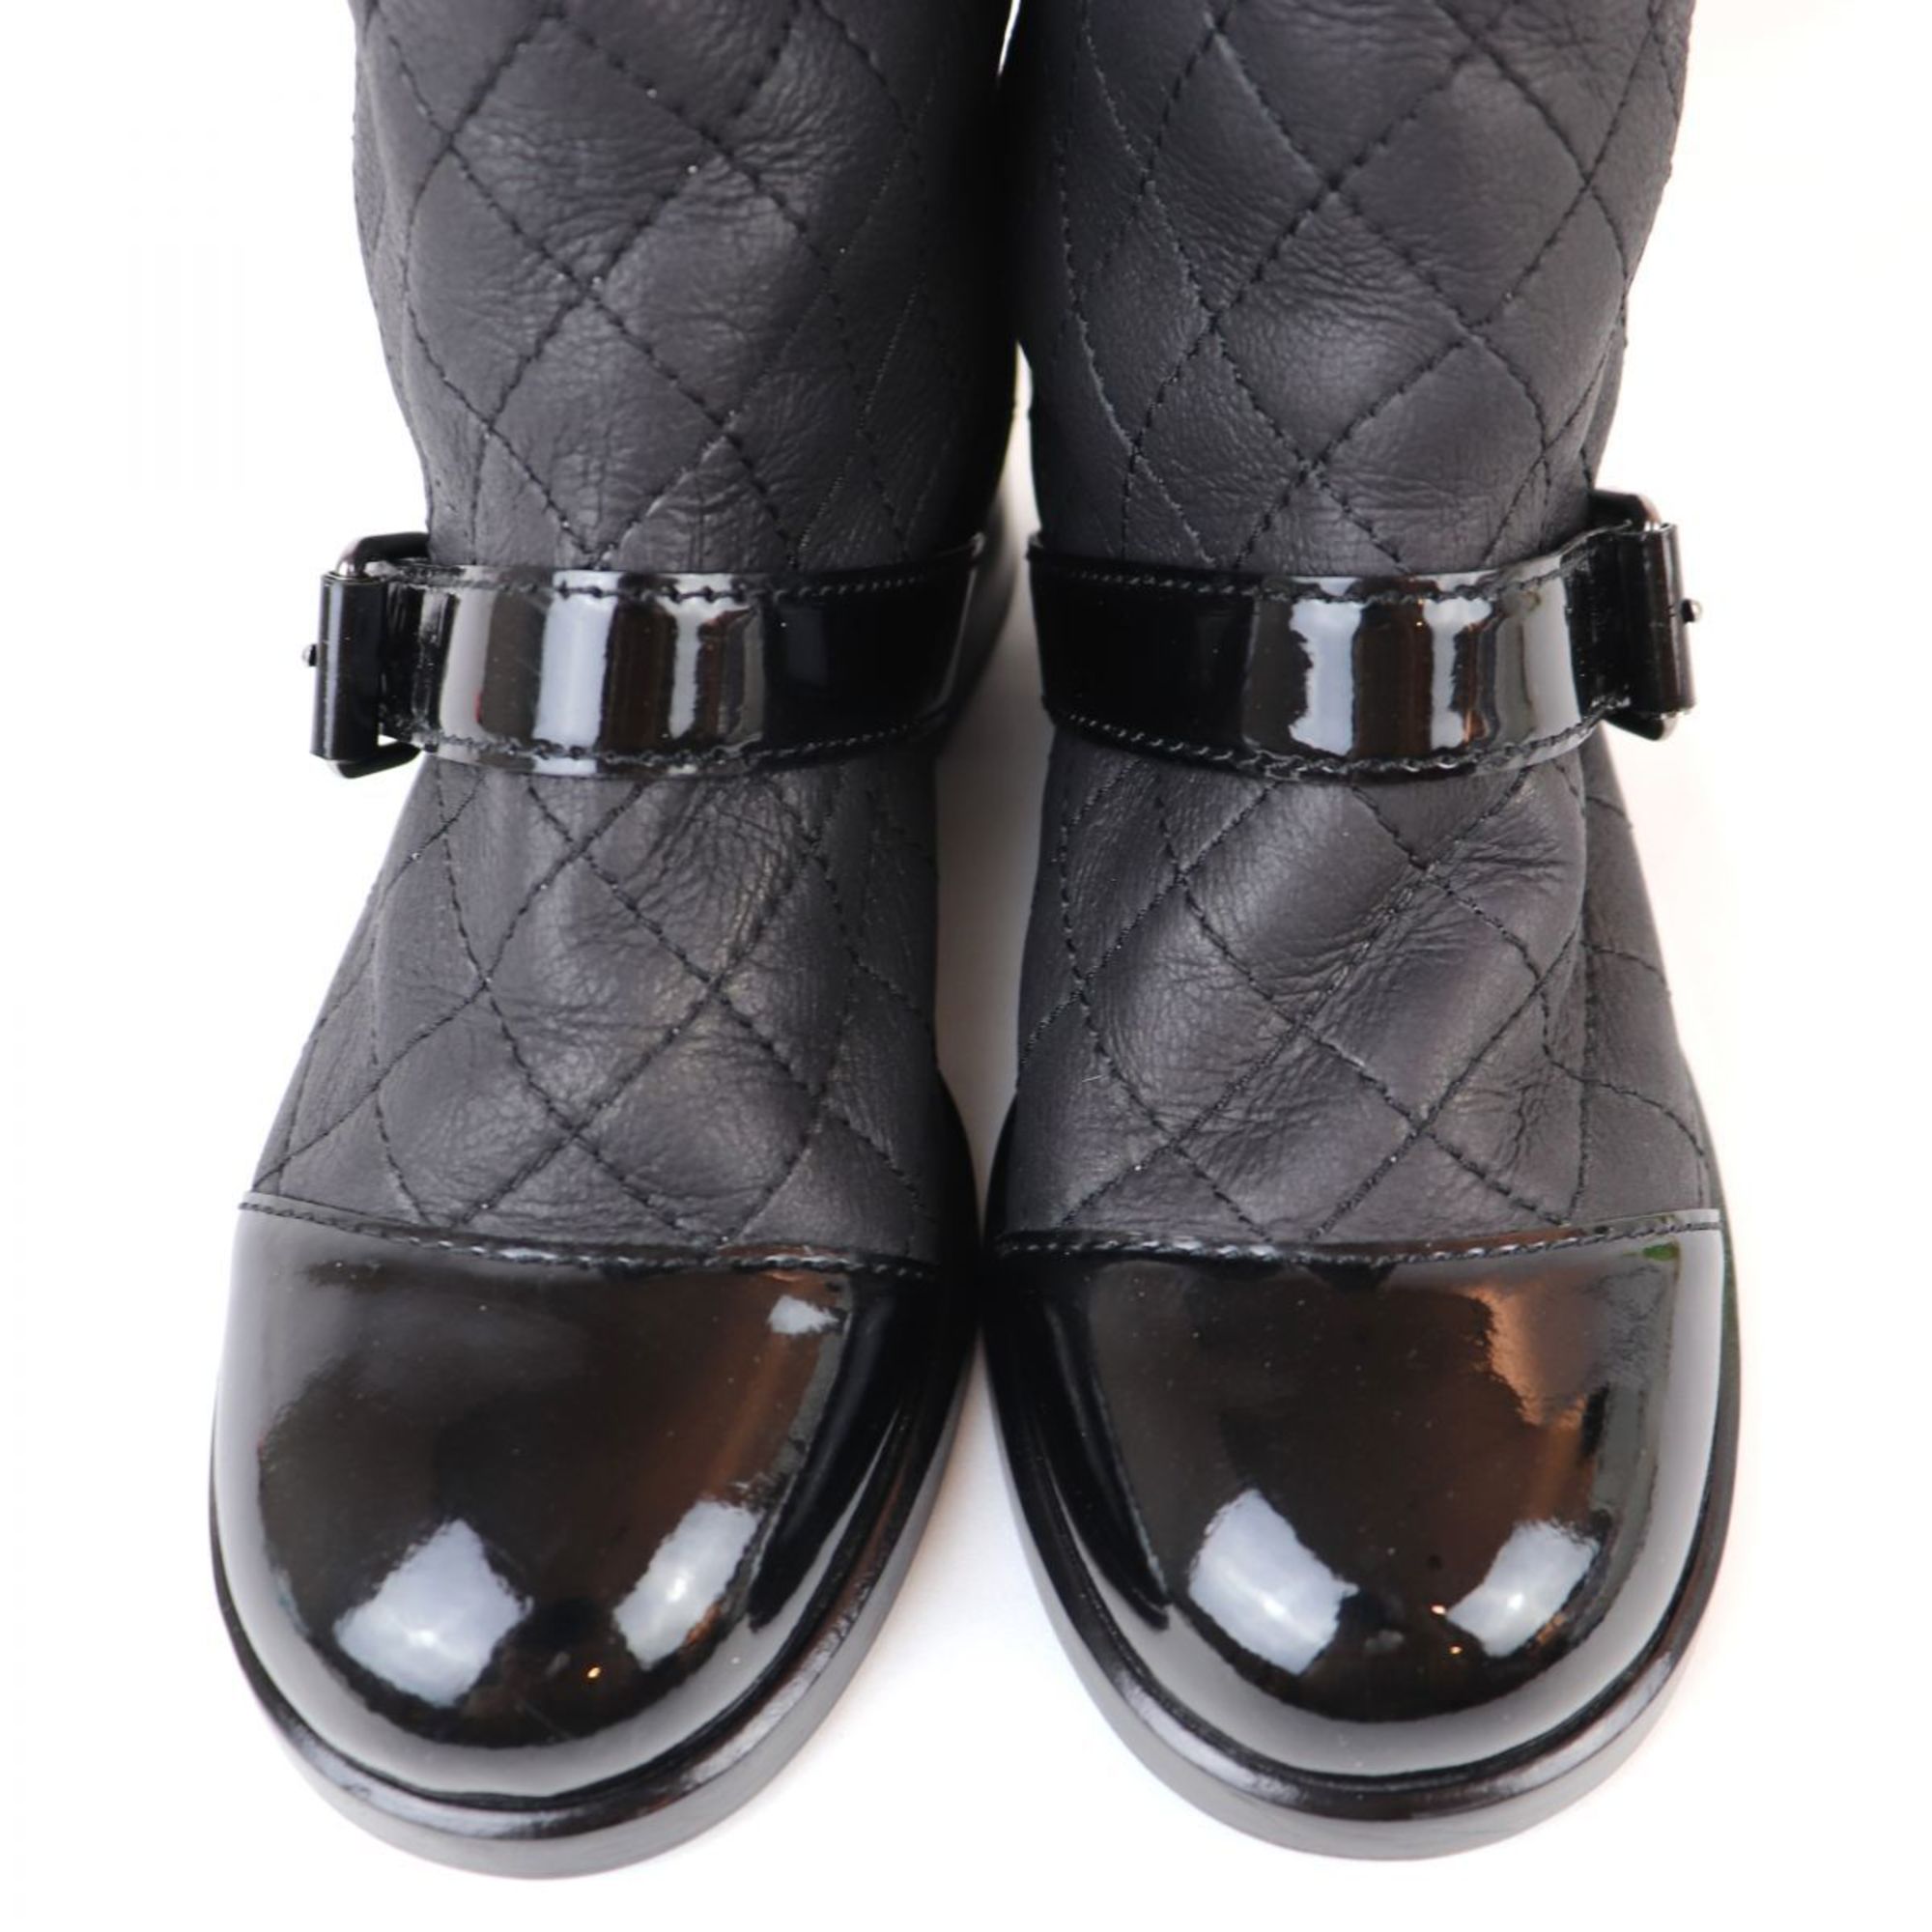 Chanel CHANEL Matrasse Patent x Leather Quilted Mouton Boots Coco Mark Ladies 34.5C Black